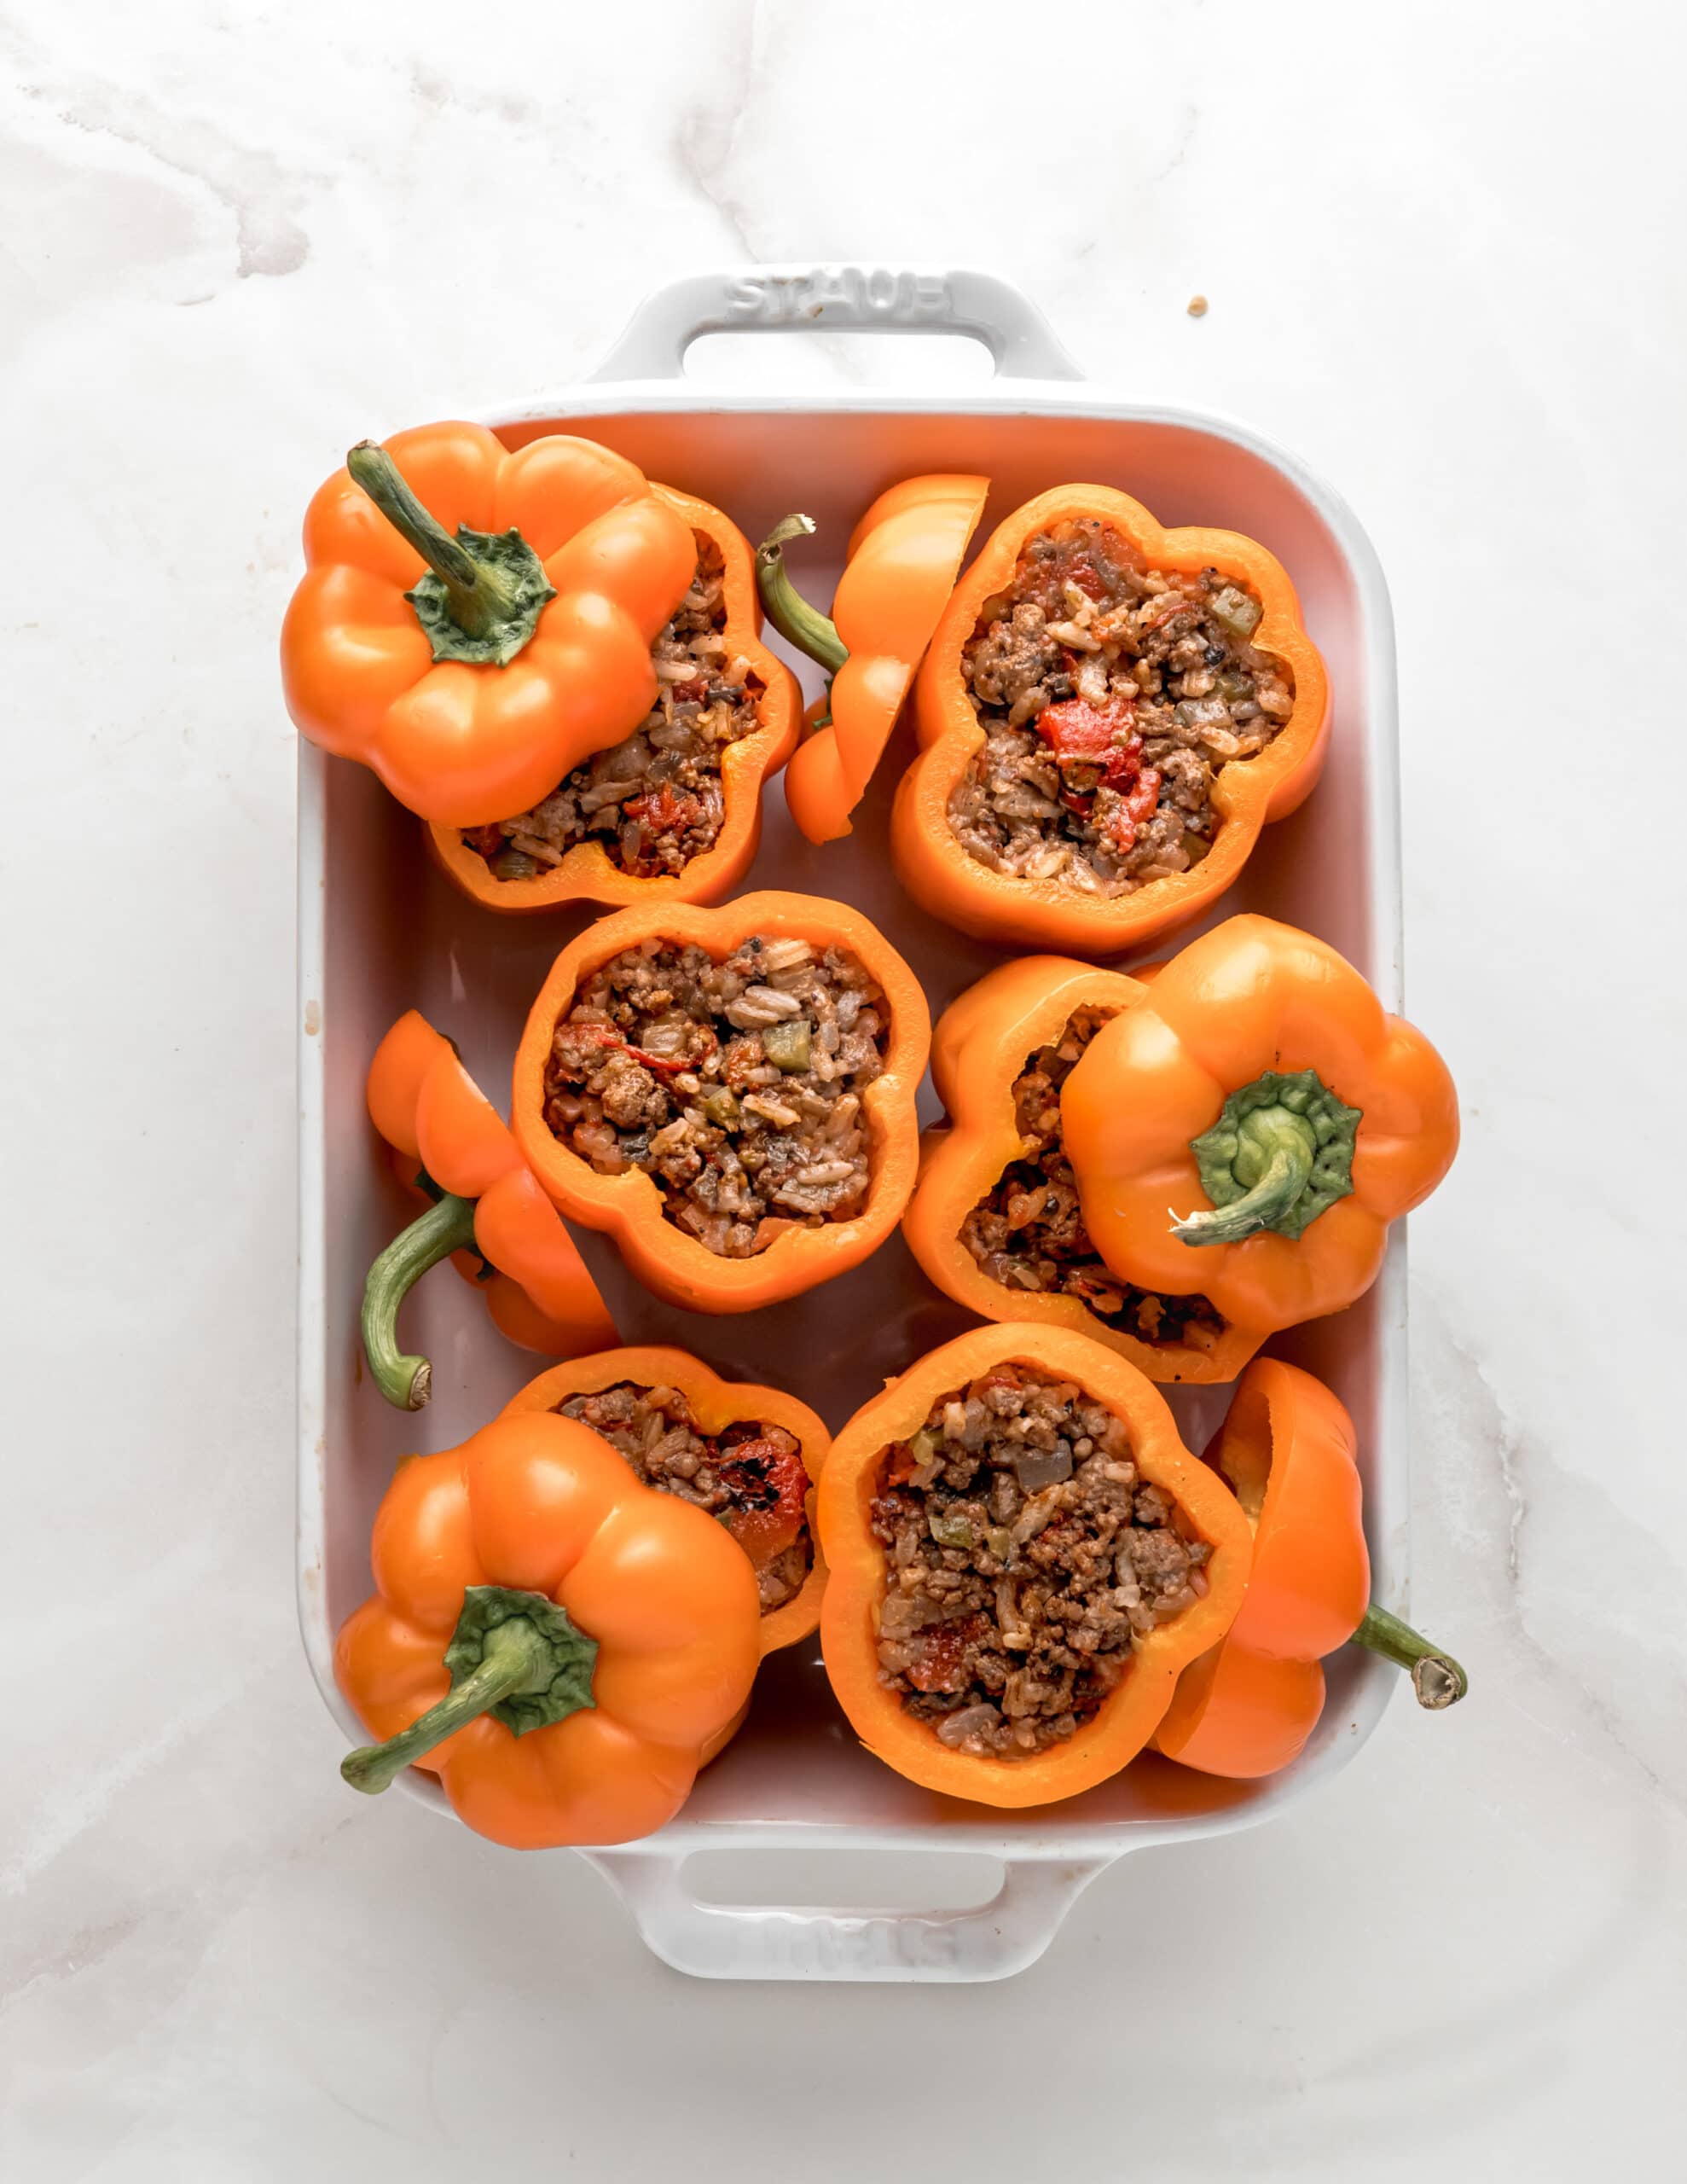 A large white ceramic baking dish with up-right orange bell  peppers stuffed with a meat mixture.